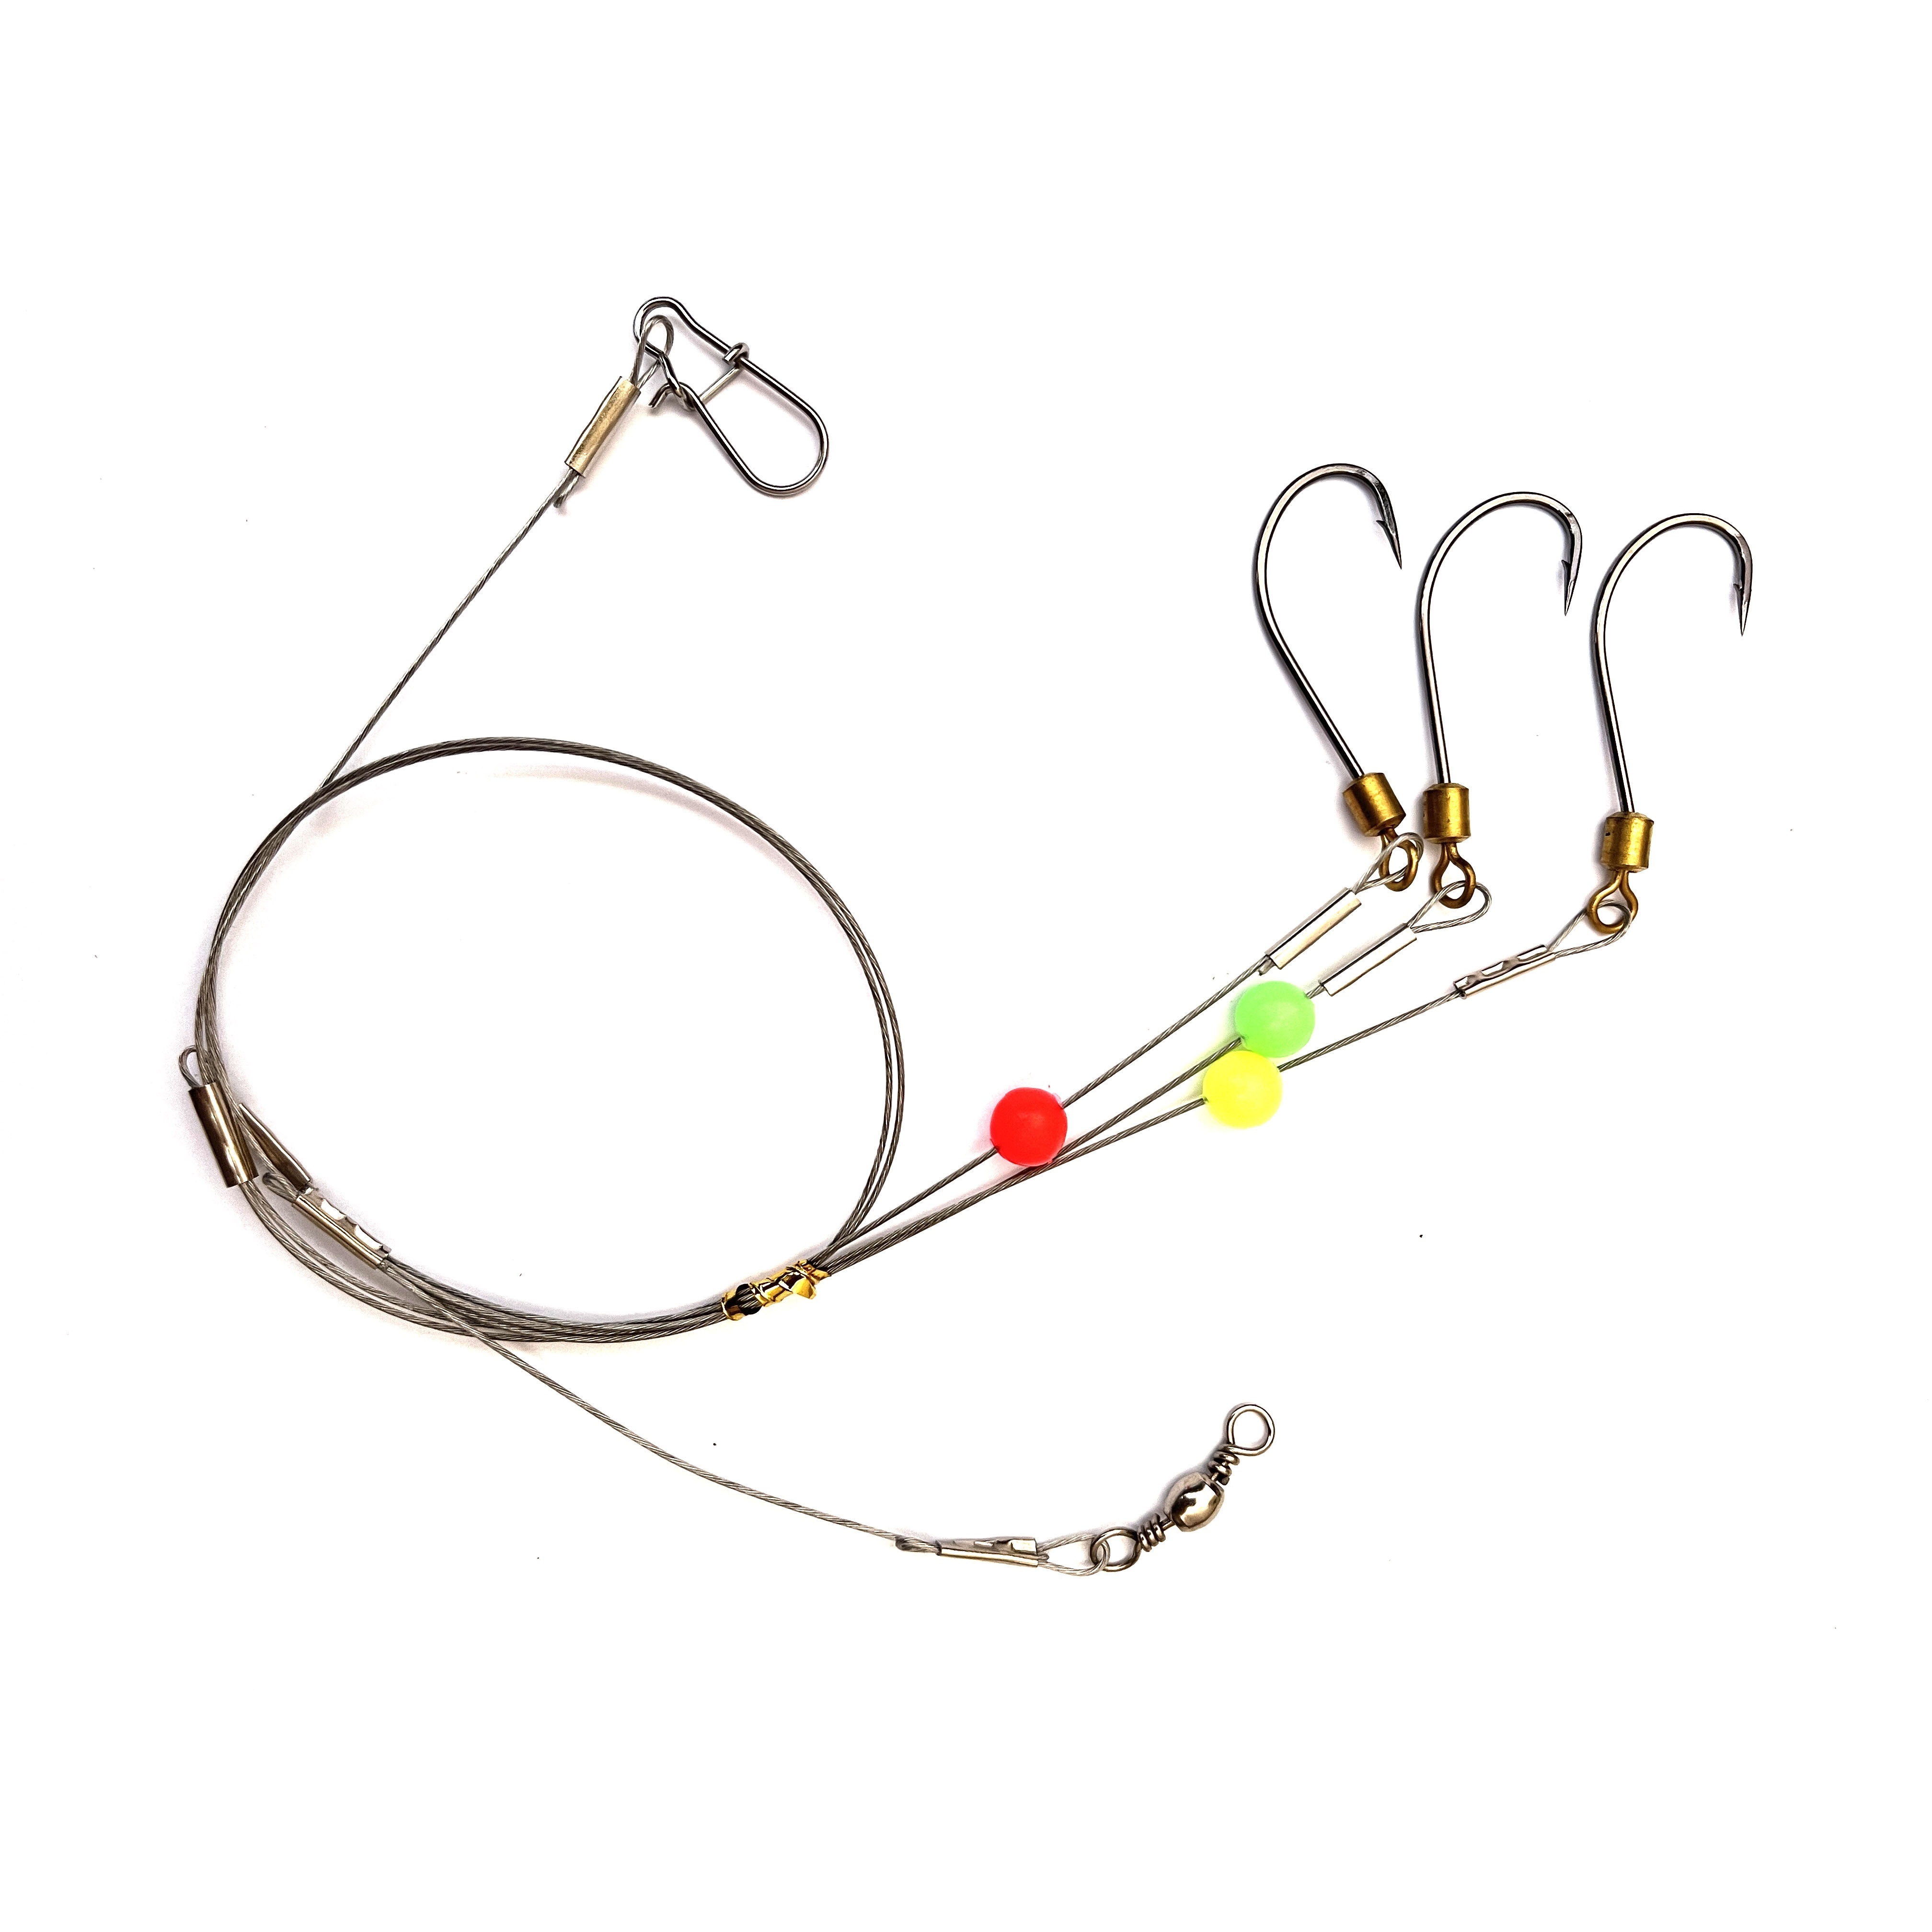 OROOTL Double Hook Rig for Trolling and Chunking Saltwater Double Trolling  Hooks Big Game Forged Stainless Steel Double Hooks for Tuna Marlin Wahoo  Dorado Fishing, Hooks -  Canada